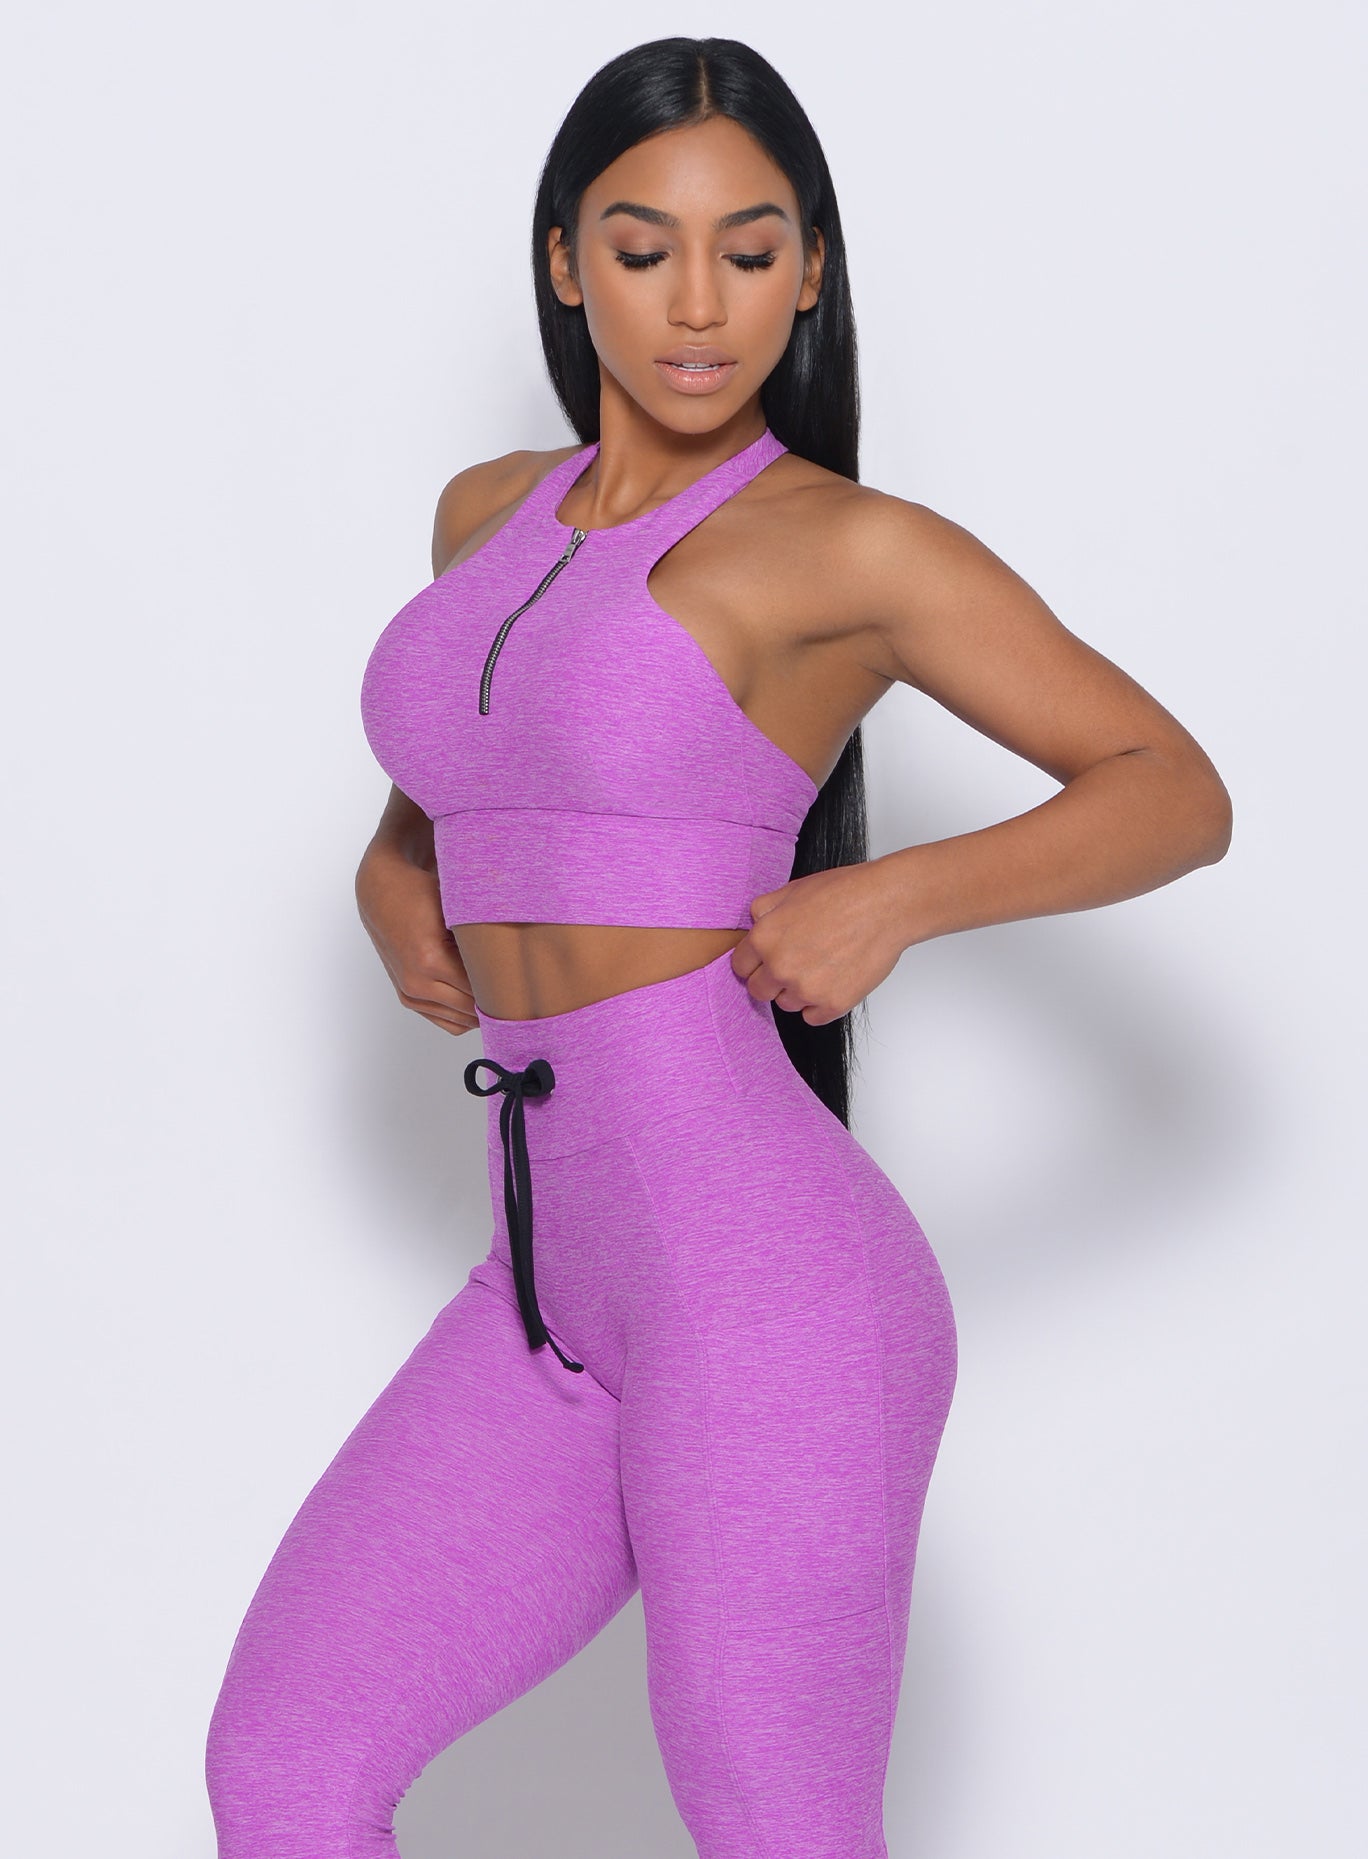 Left side view of the model angled left wearing our edgy longline bra in purple rain color and a matching leggings